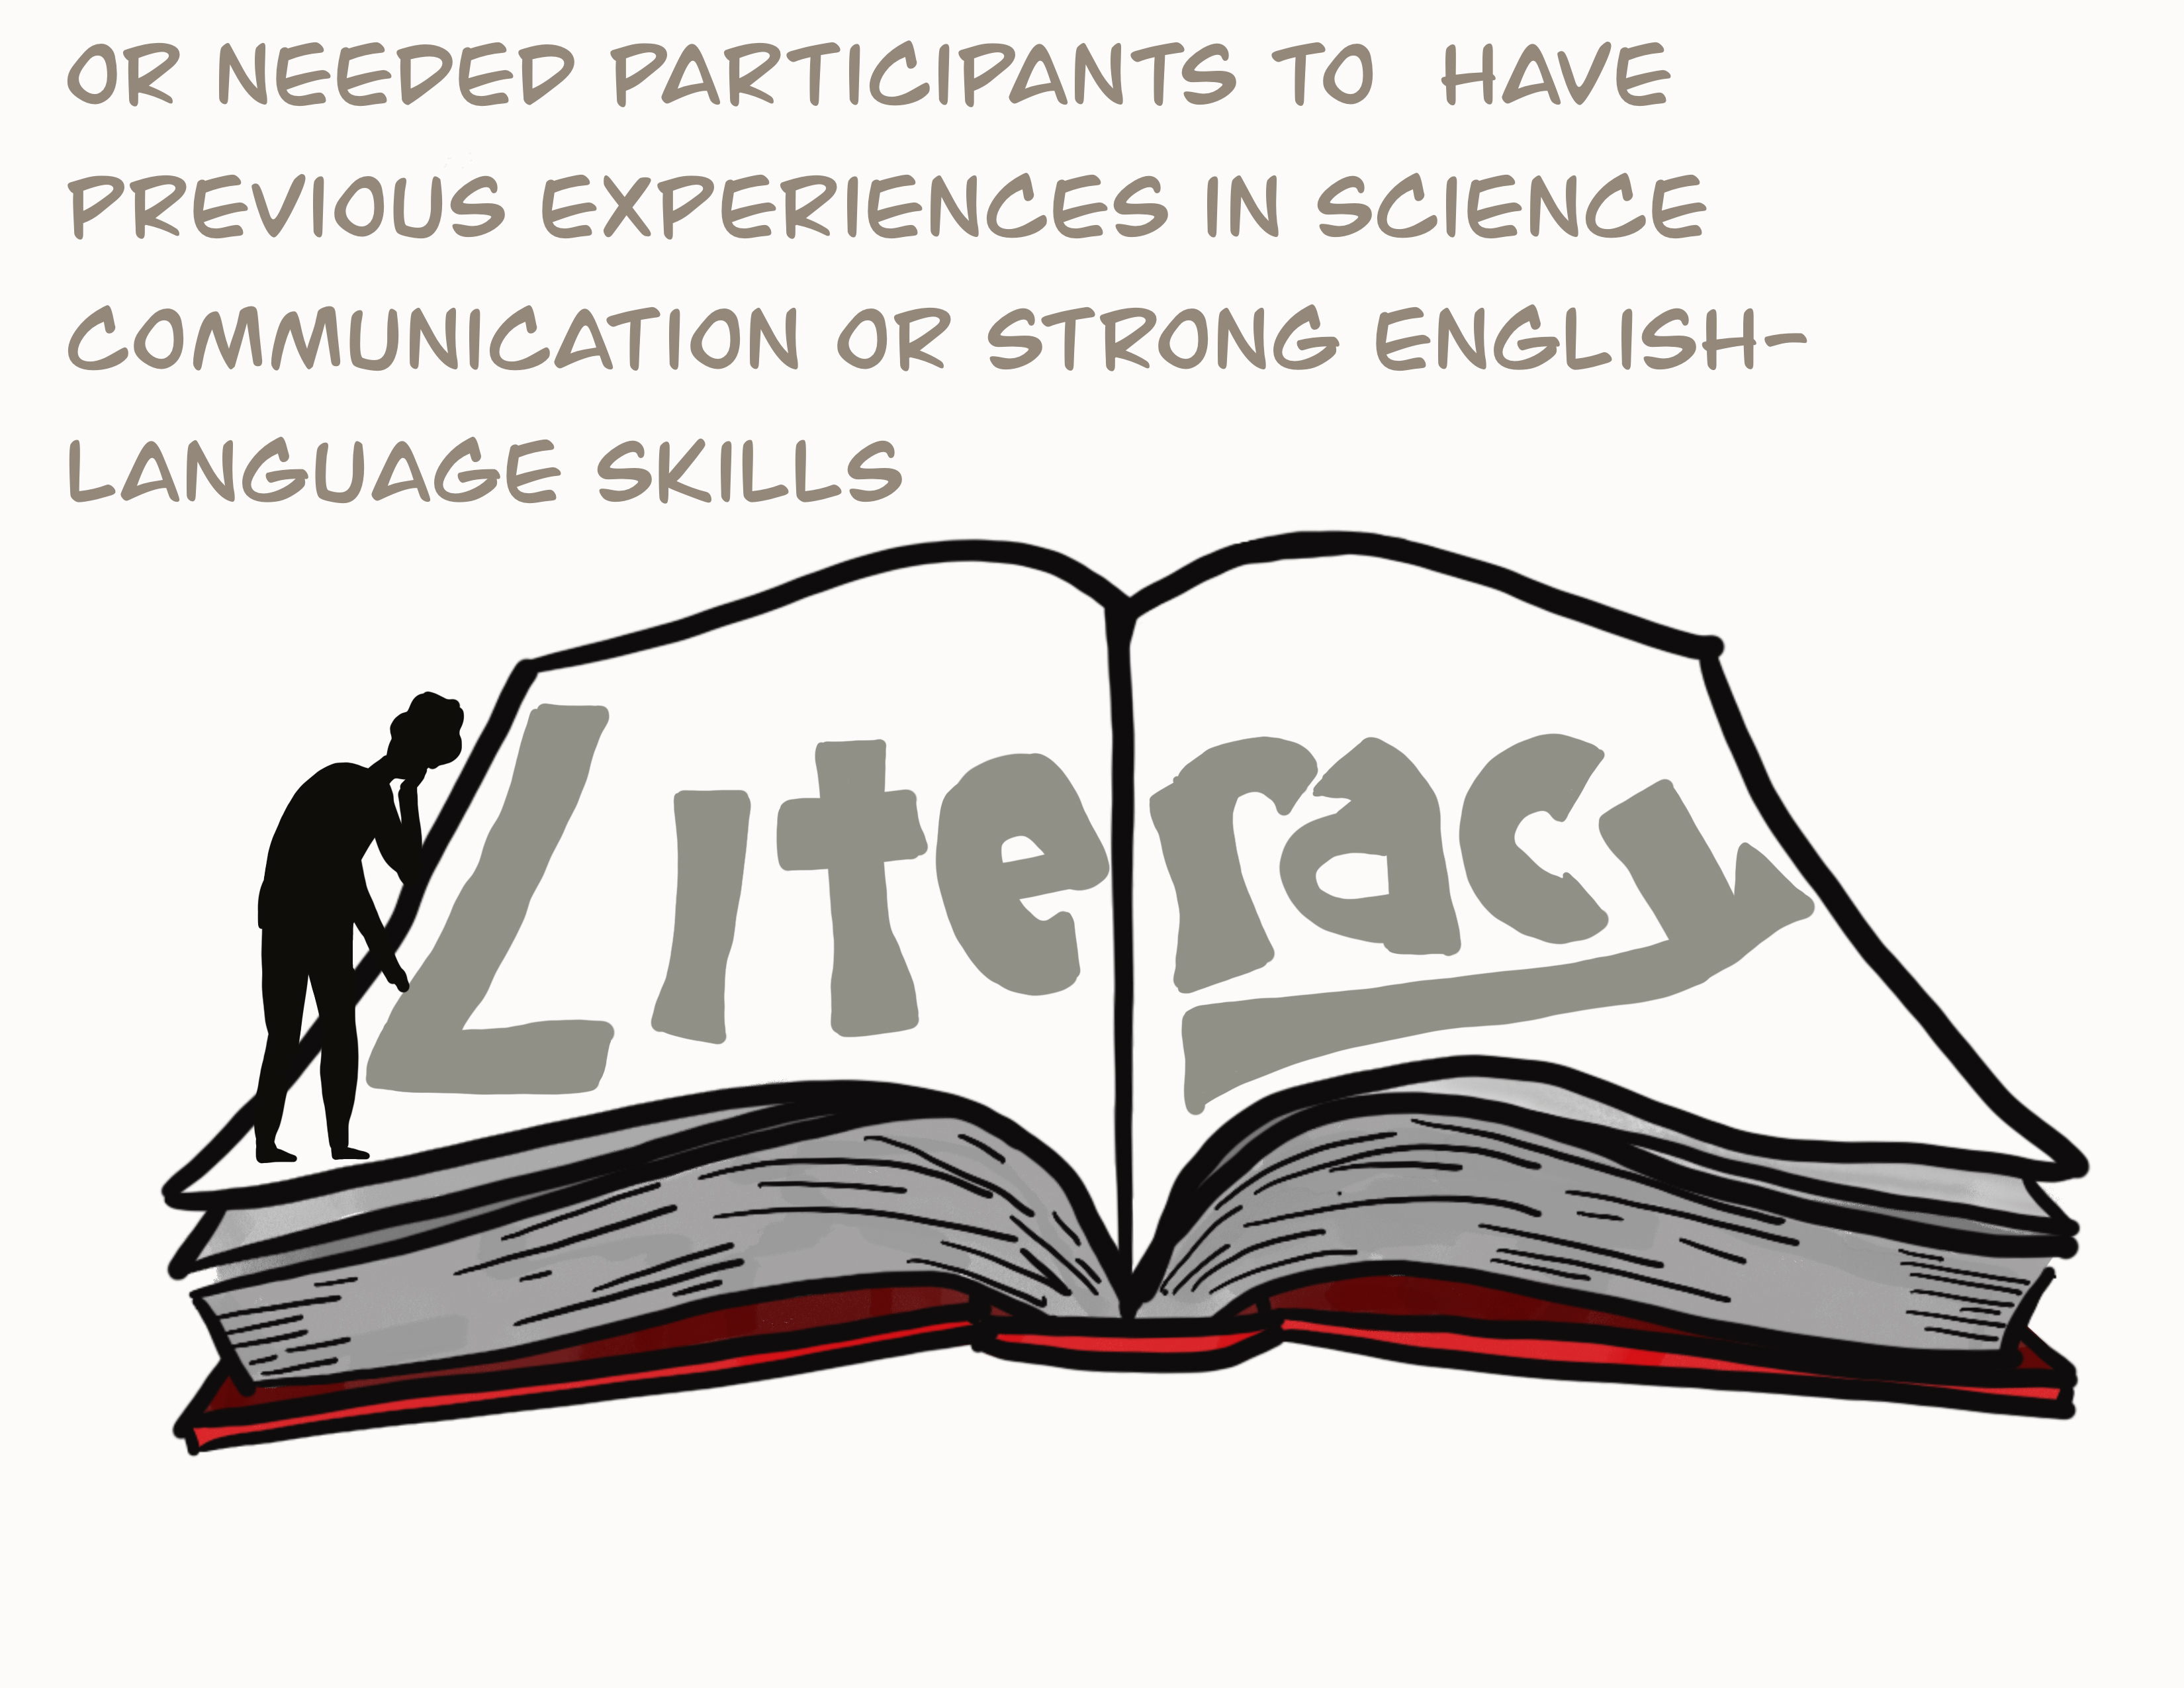 Or needed participants to have previous experiences in science communication or strong English-language skills (literacy)